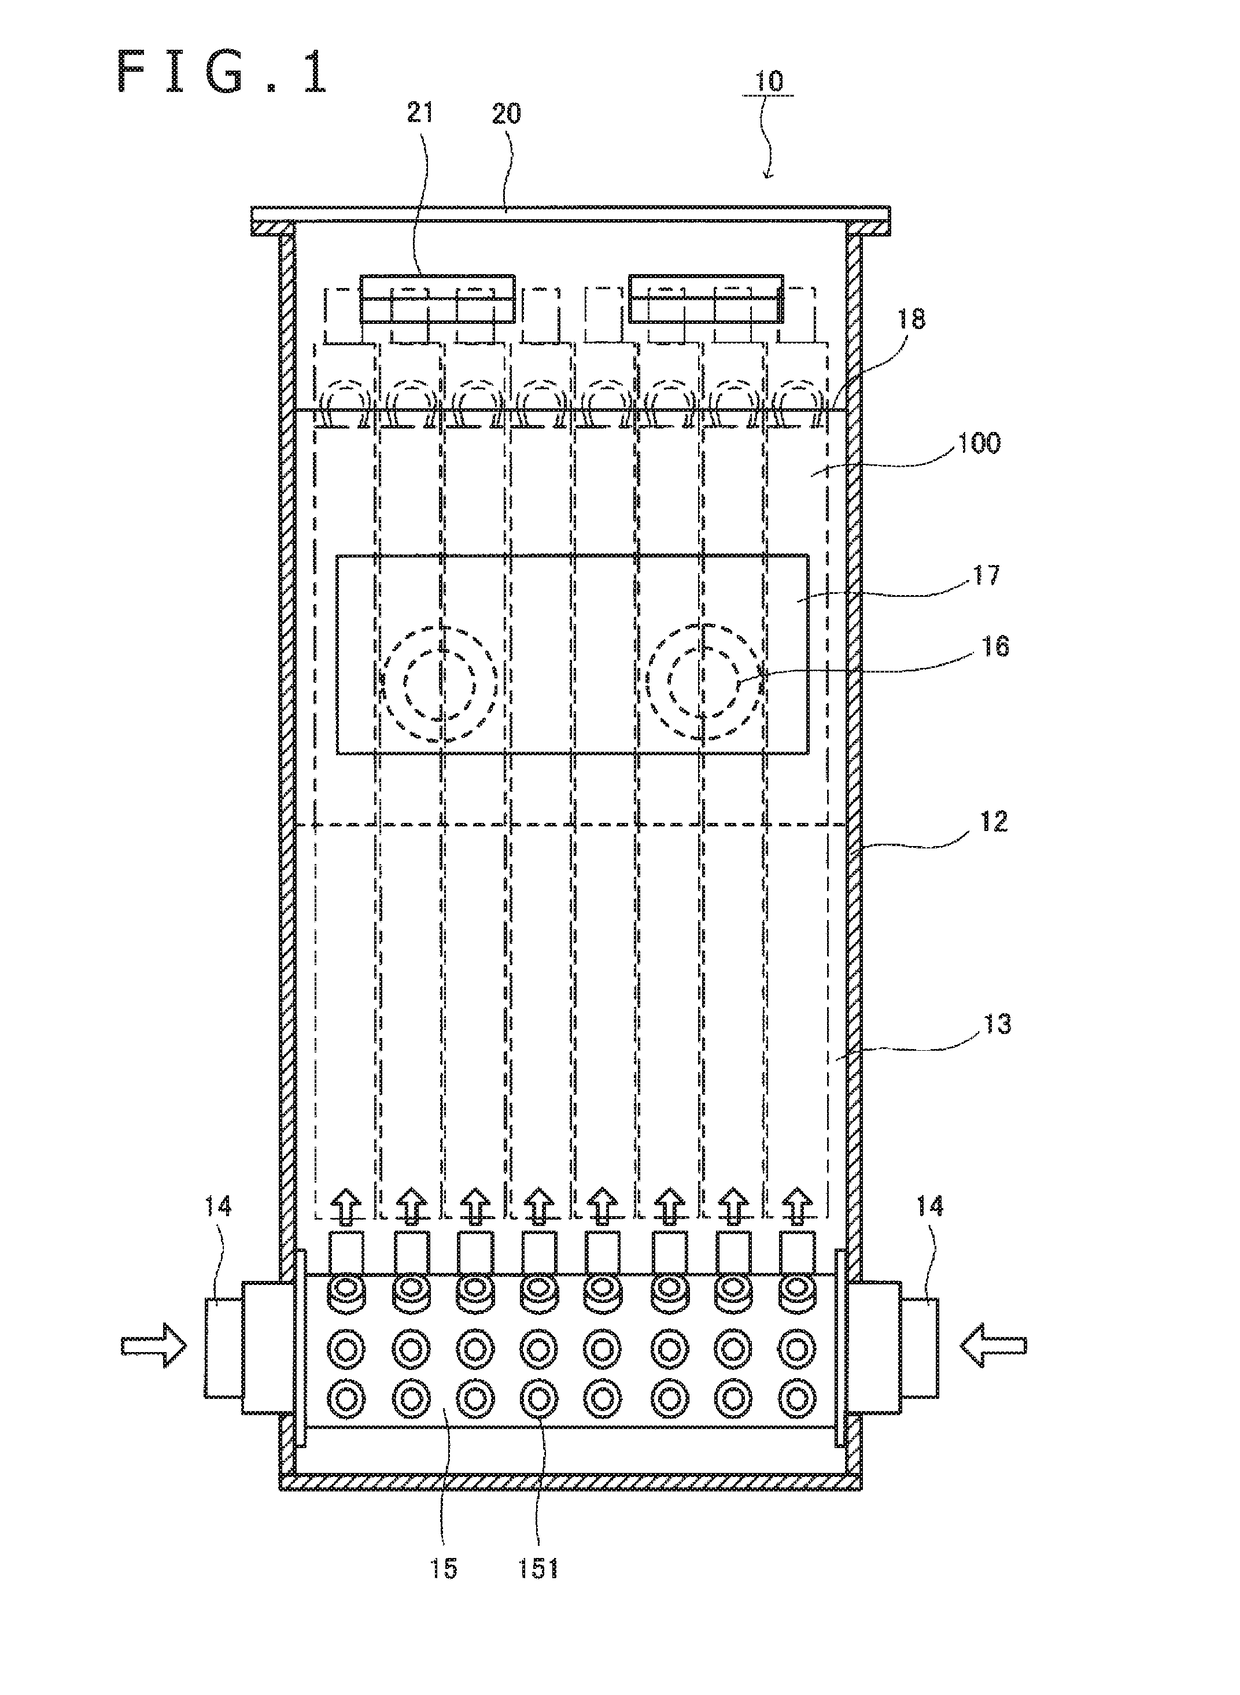 Cooling system for electronic equipment